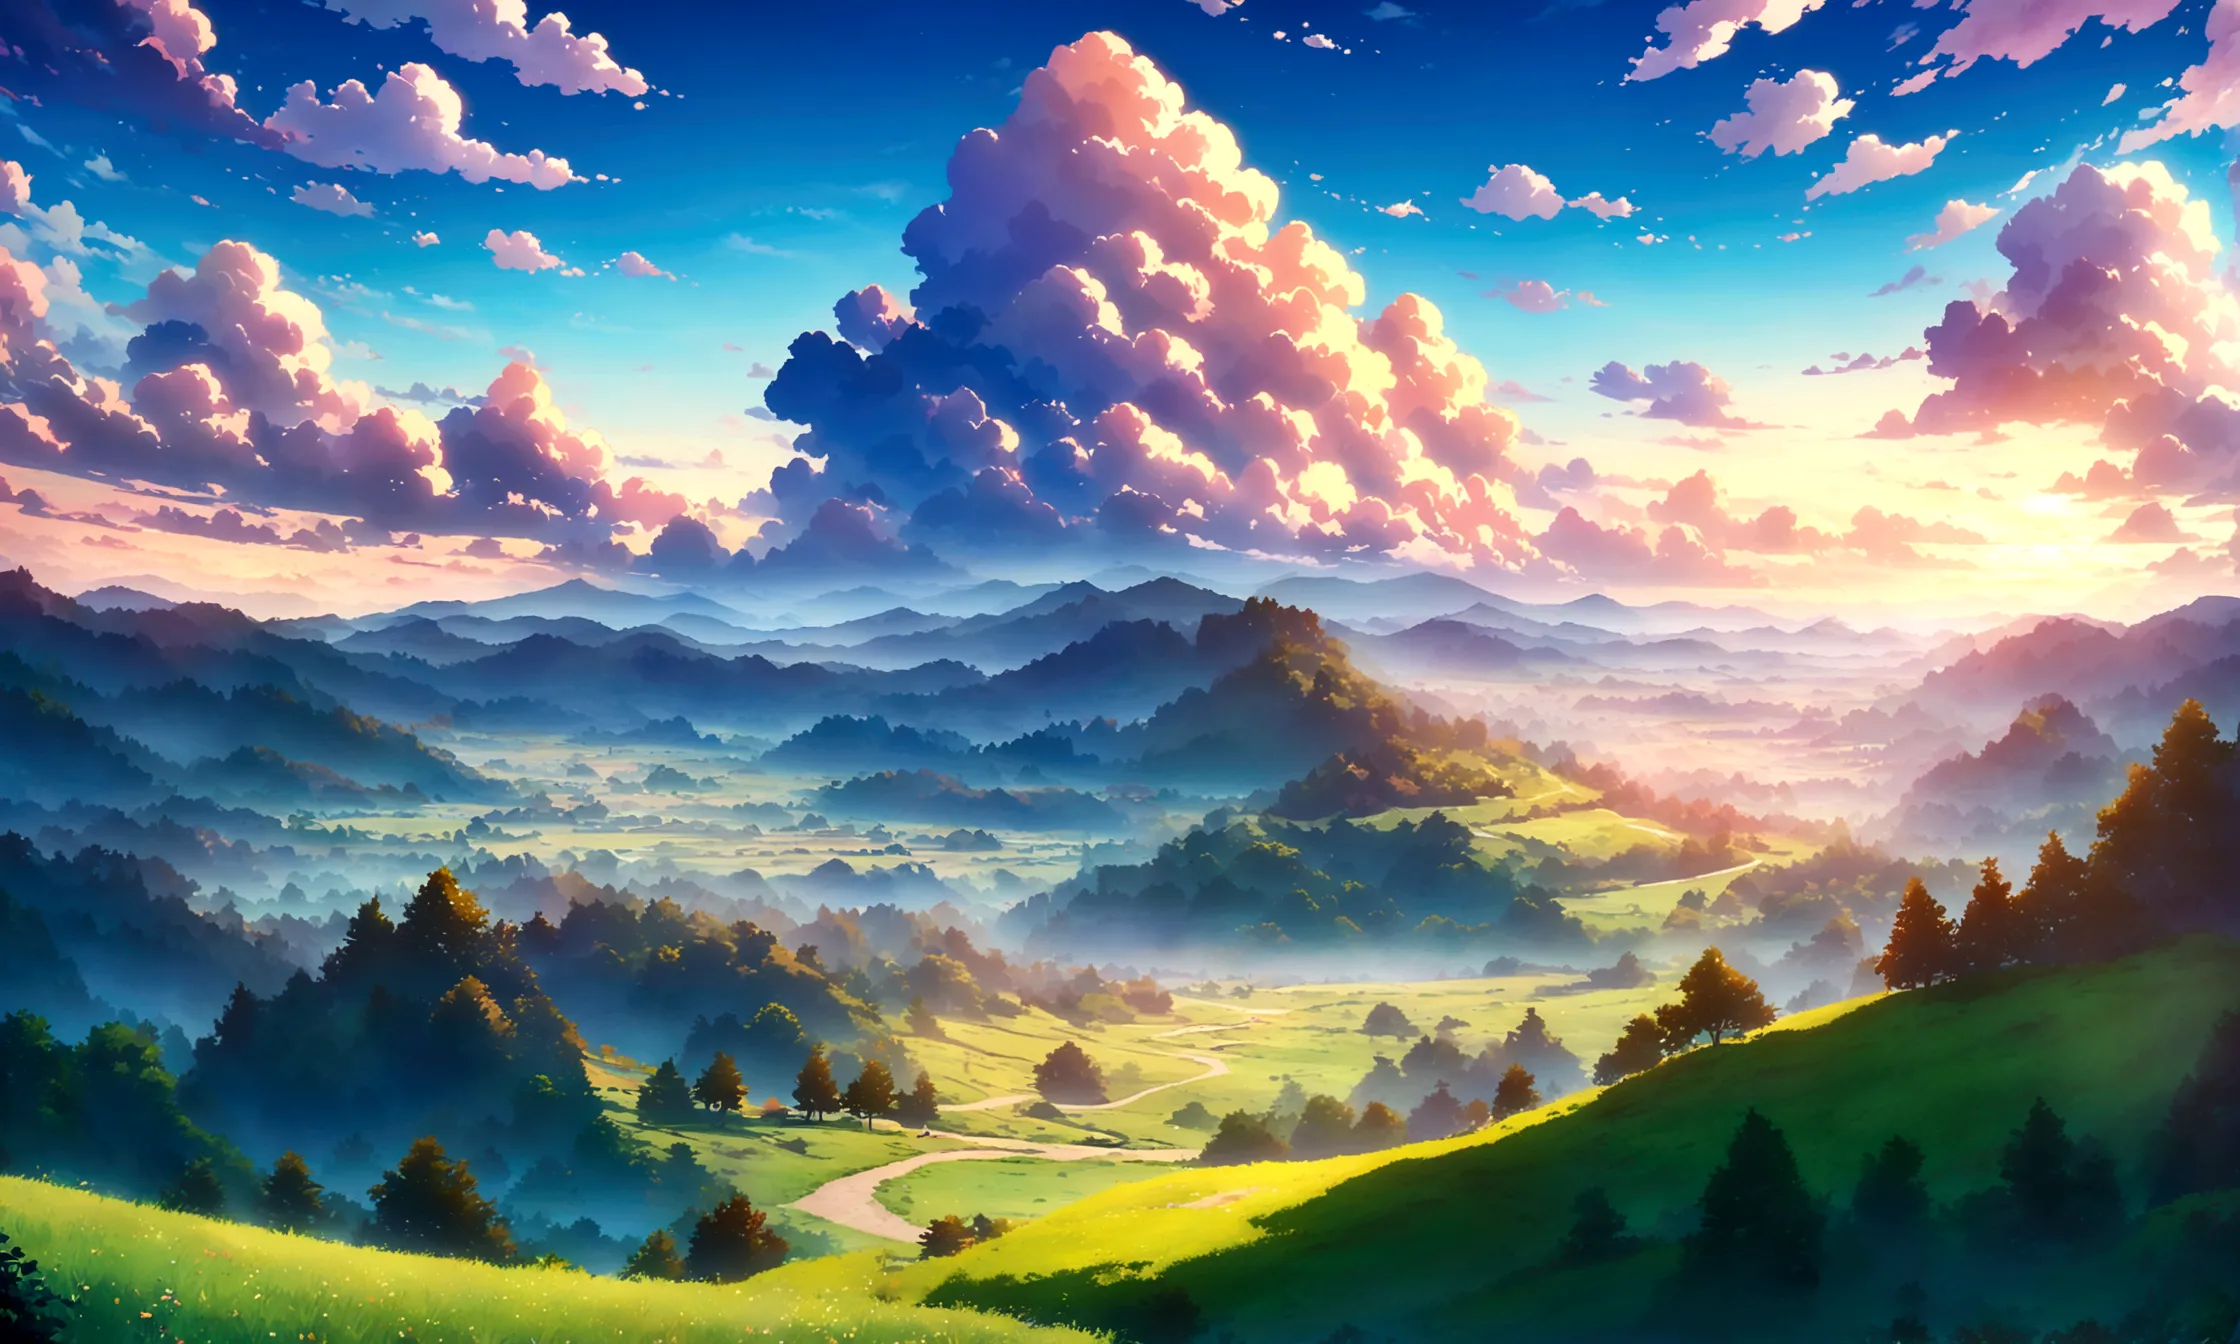 
anime - style painting of a grassy field, anime countryside landscape, anime landscape, anime landscape wallpaper, anime backgr...